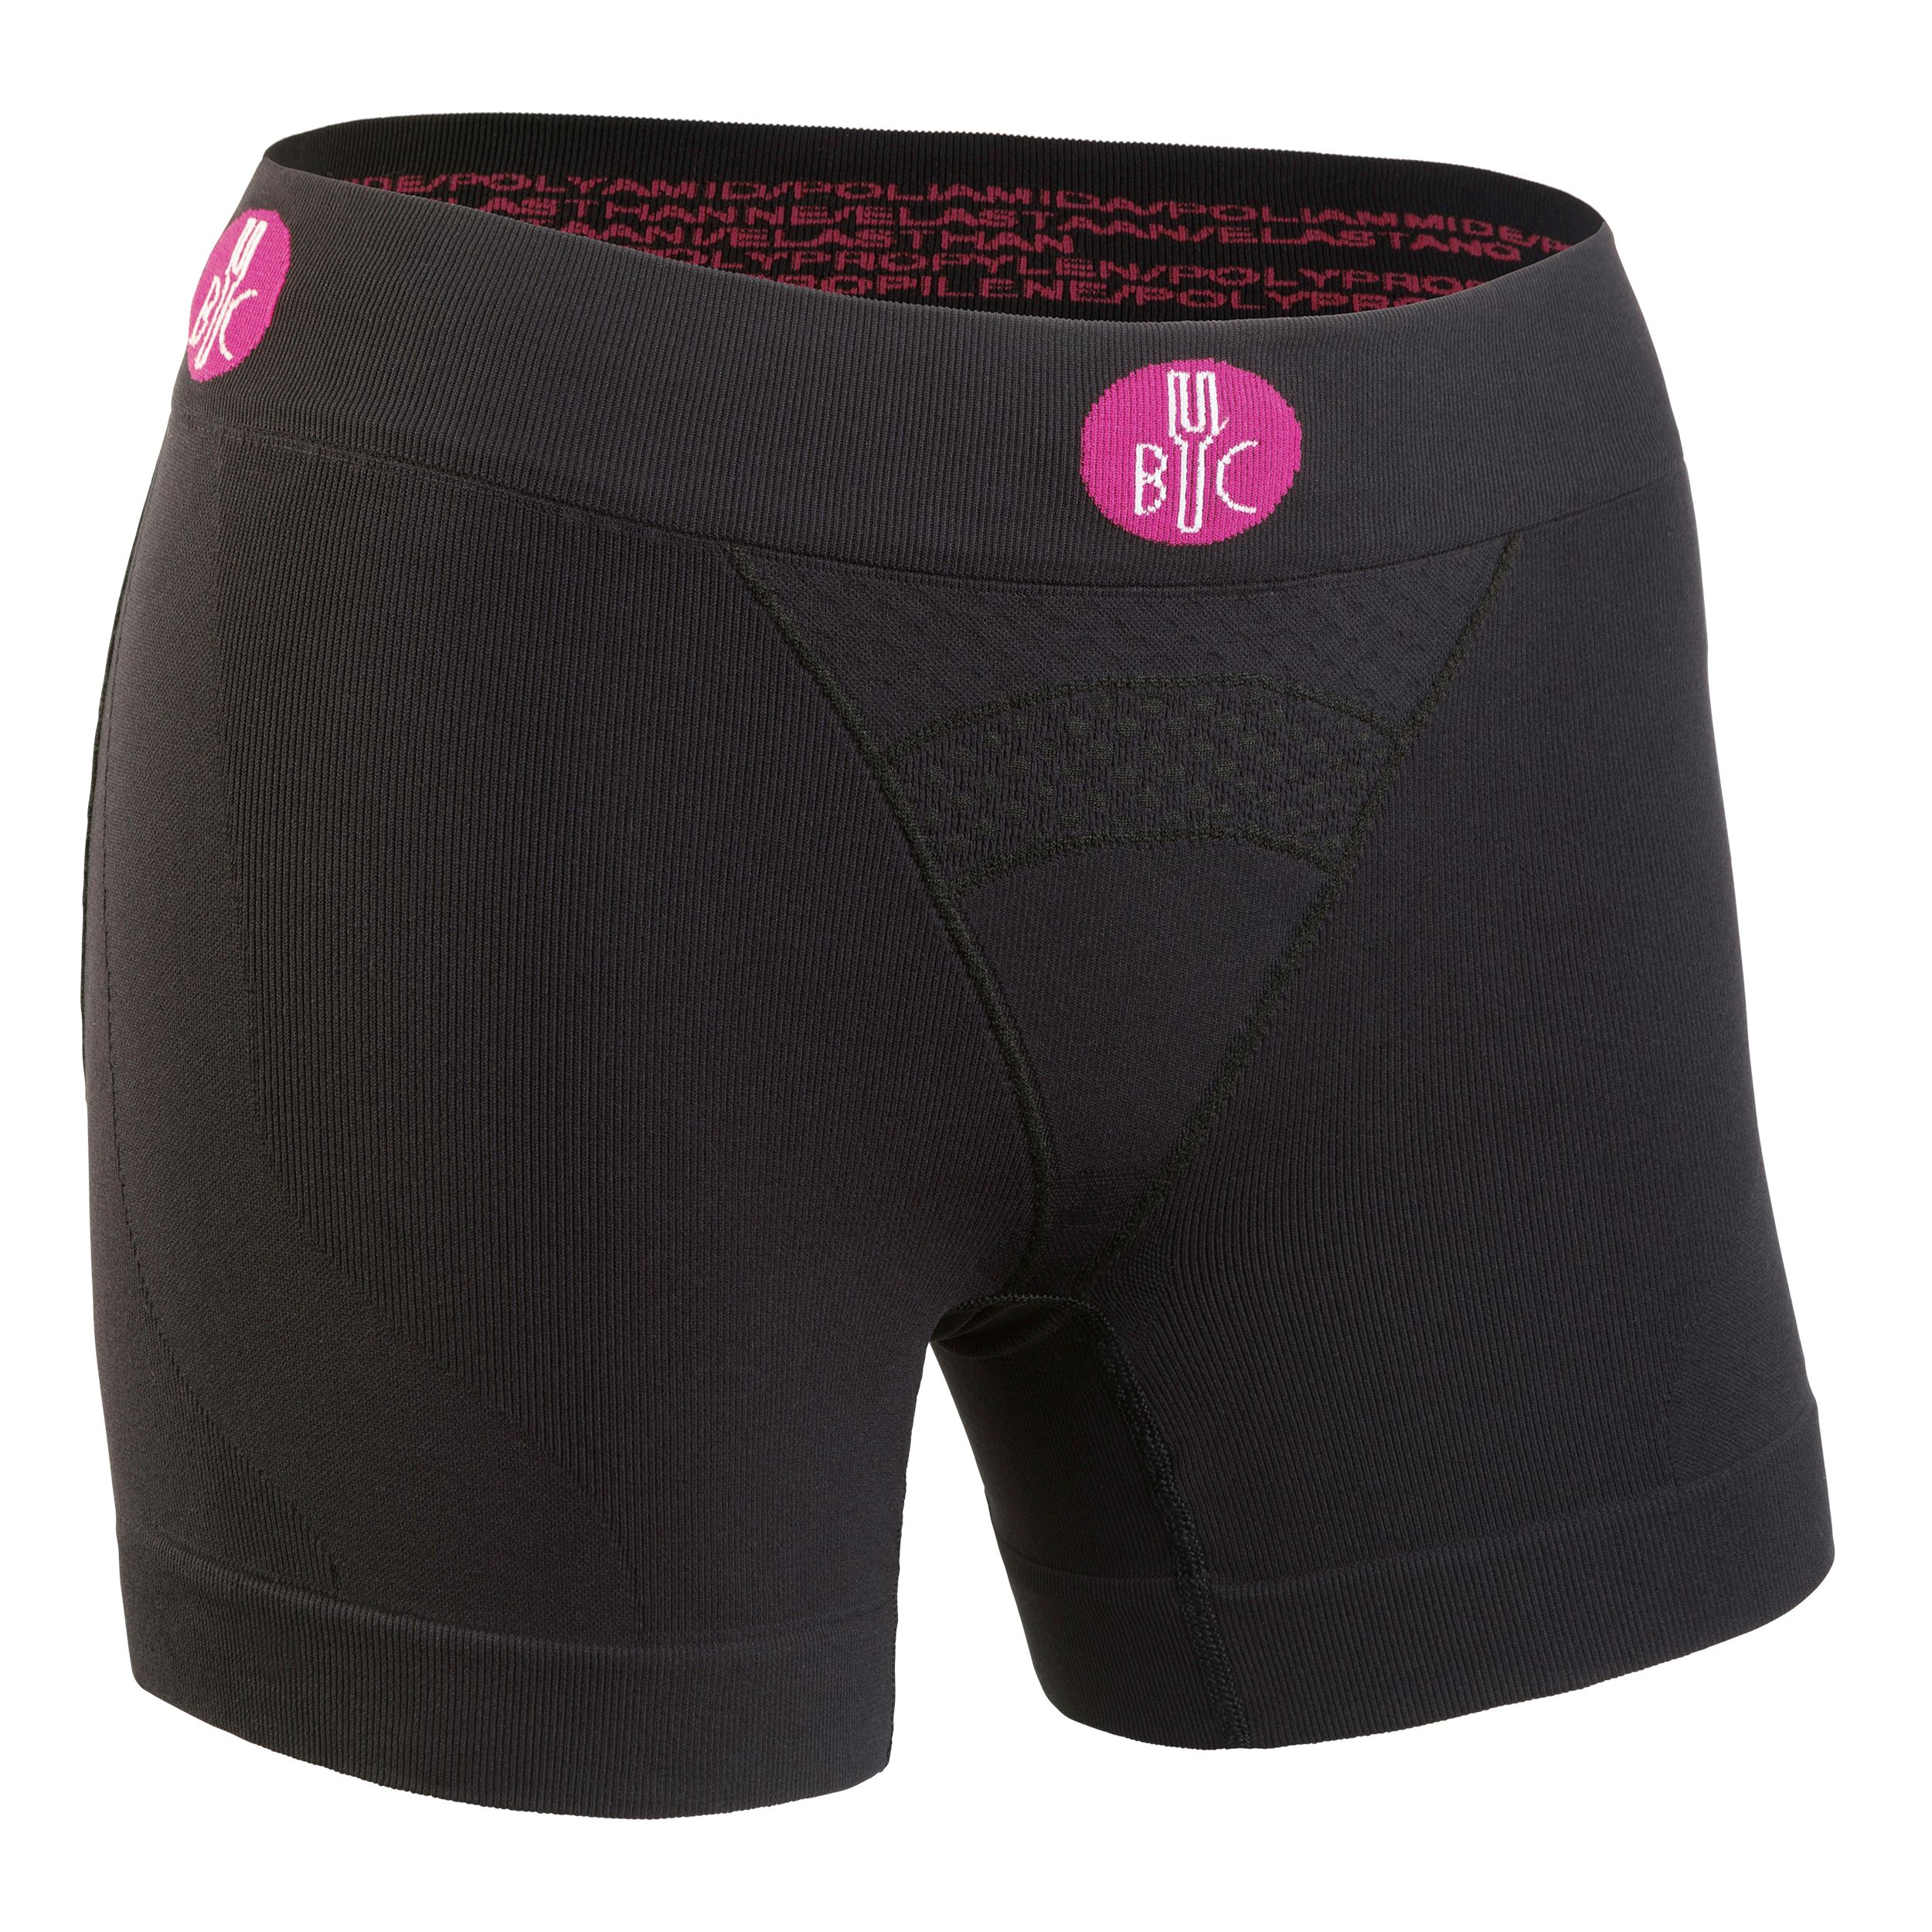 FOR.BICY Lady Downtown Boxer with Pad - Black/Black 